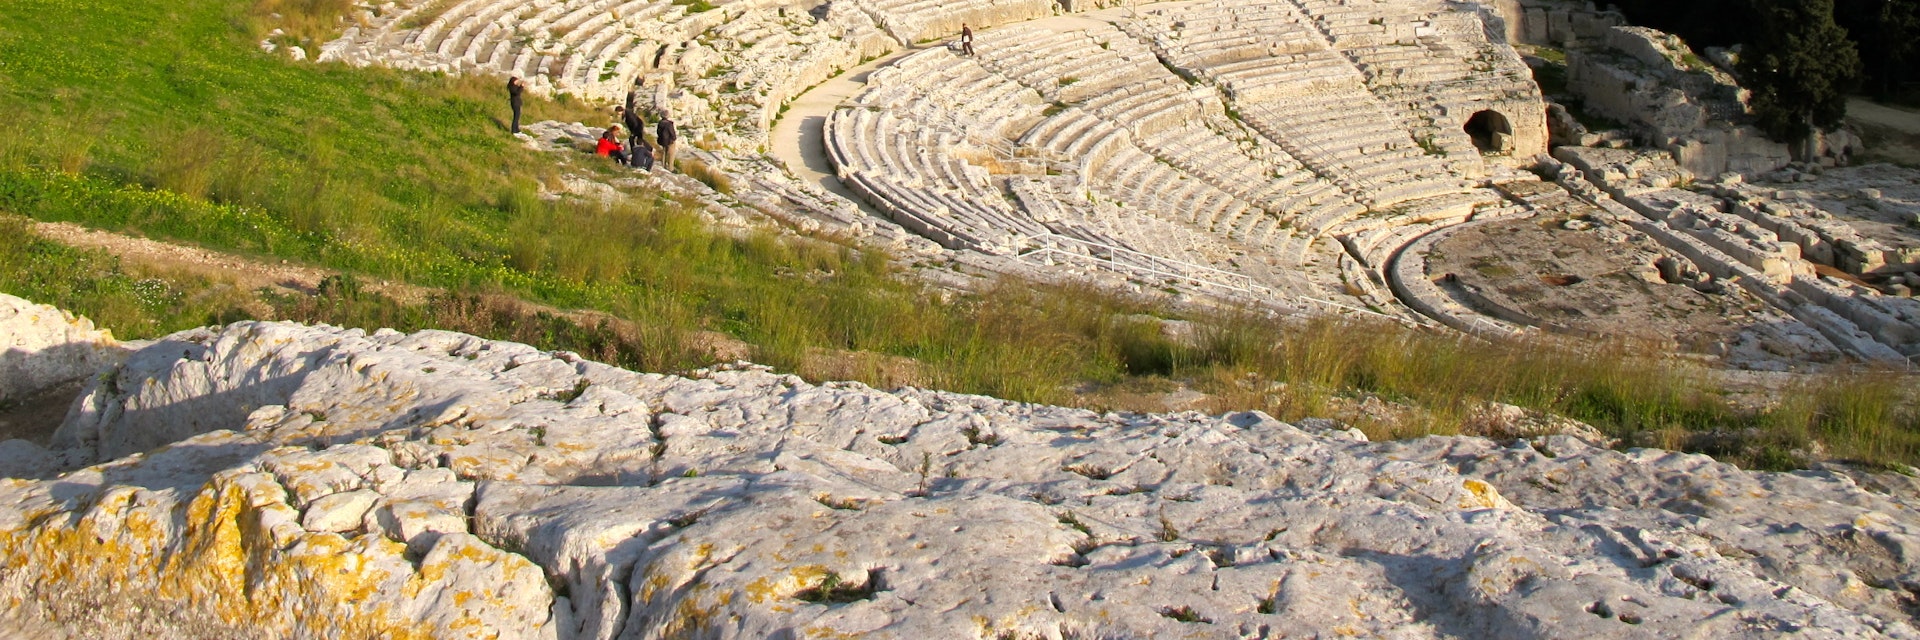 Italy, Sicily, Siracusa, Greek theater